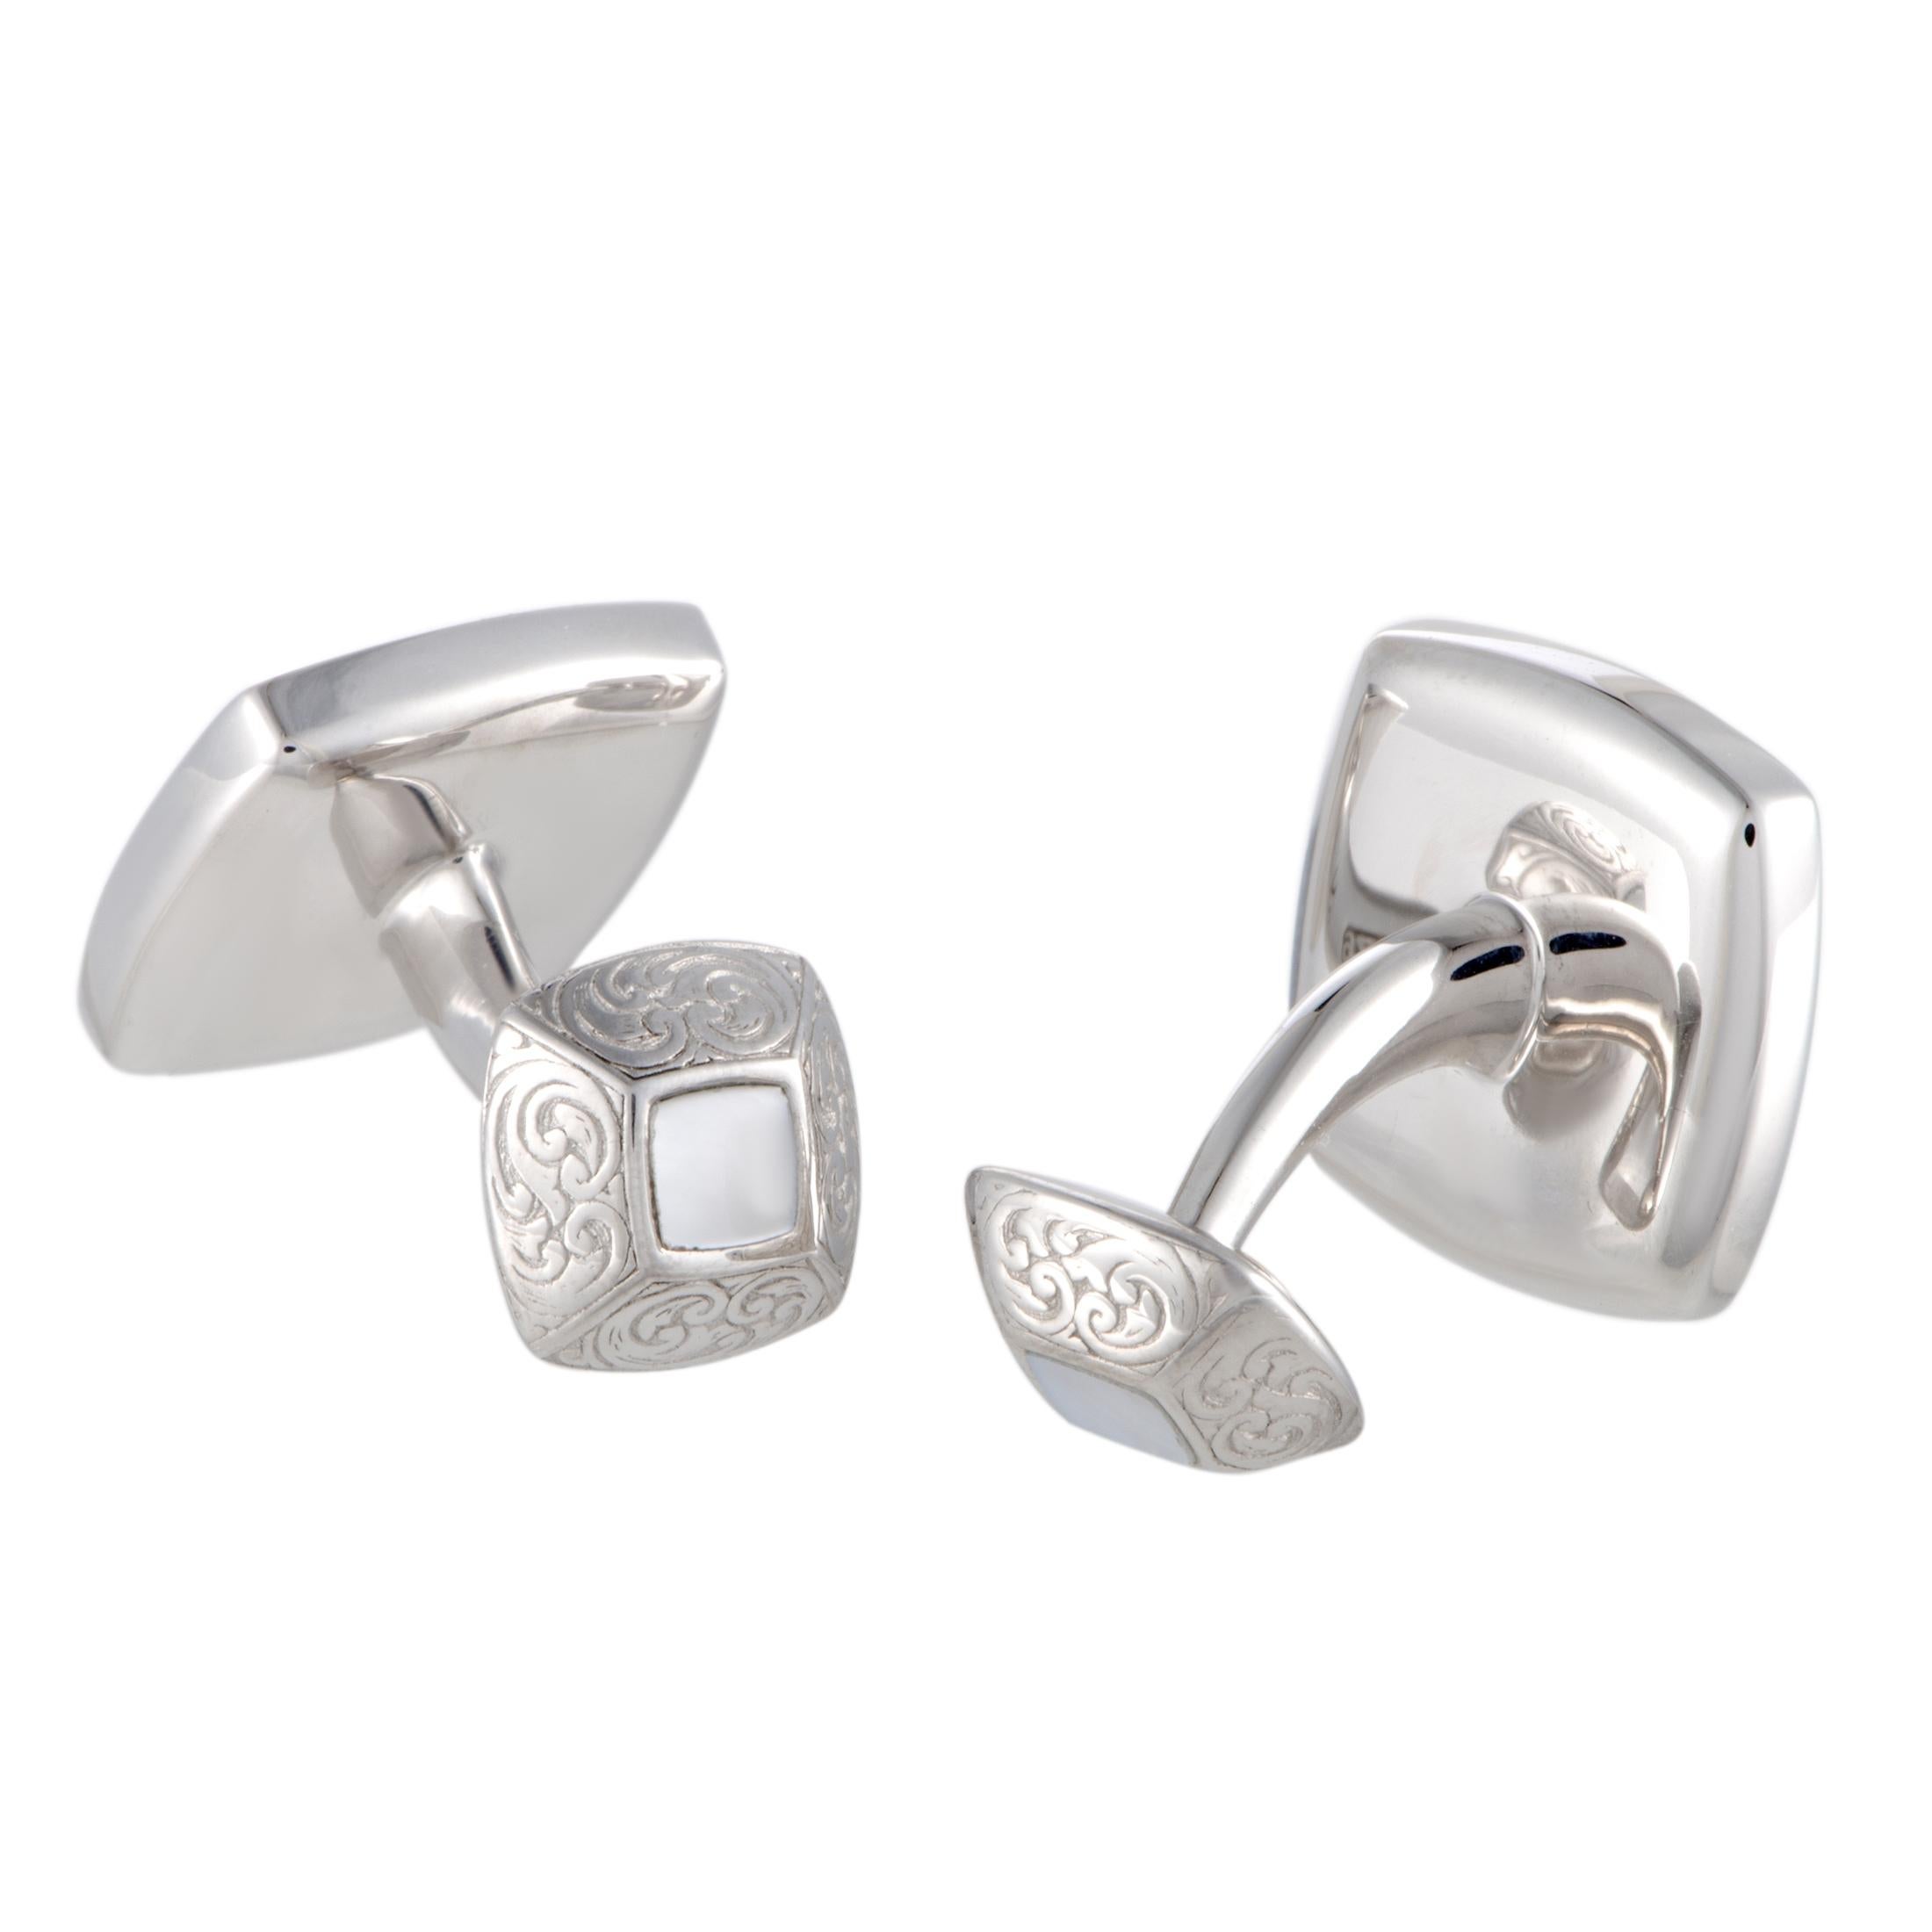 Boost the aesthetical value of your attire in a stunningly offbeat yet incredibly subtle manner with this exemplary pair of cufflinks that features bold, masculine design and exceptional craftsmanship quality. The cufflinks are presented by Stephen